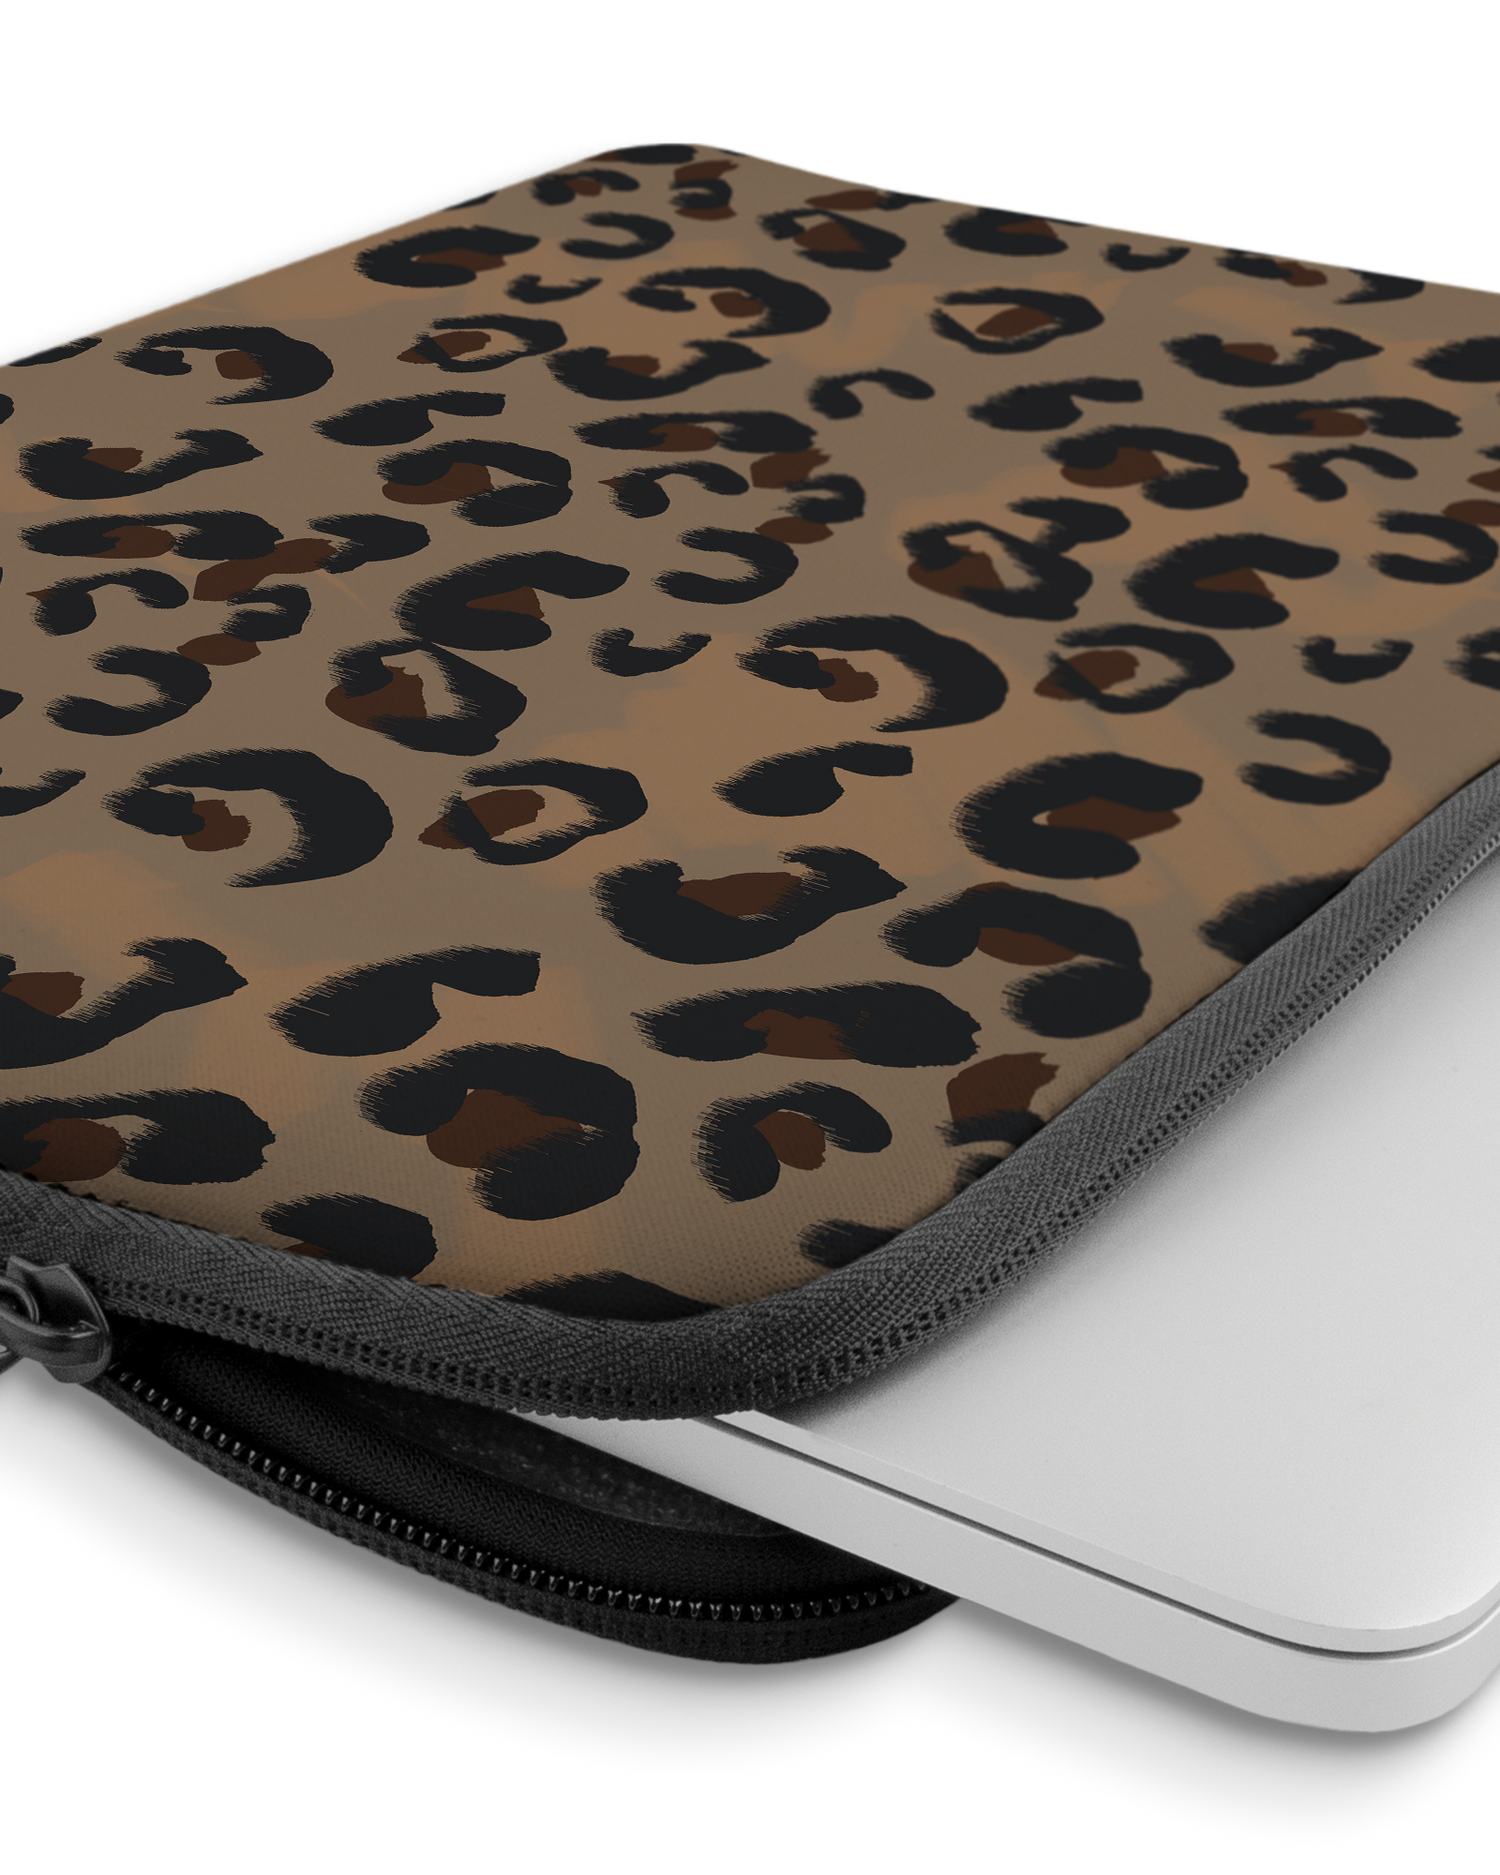 Leopard Repeat Laptop Case 13-14 inch with device inside